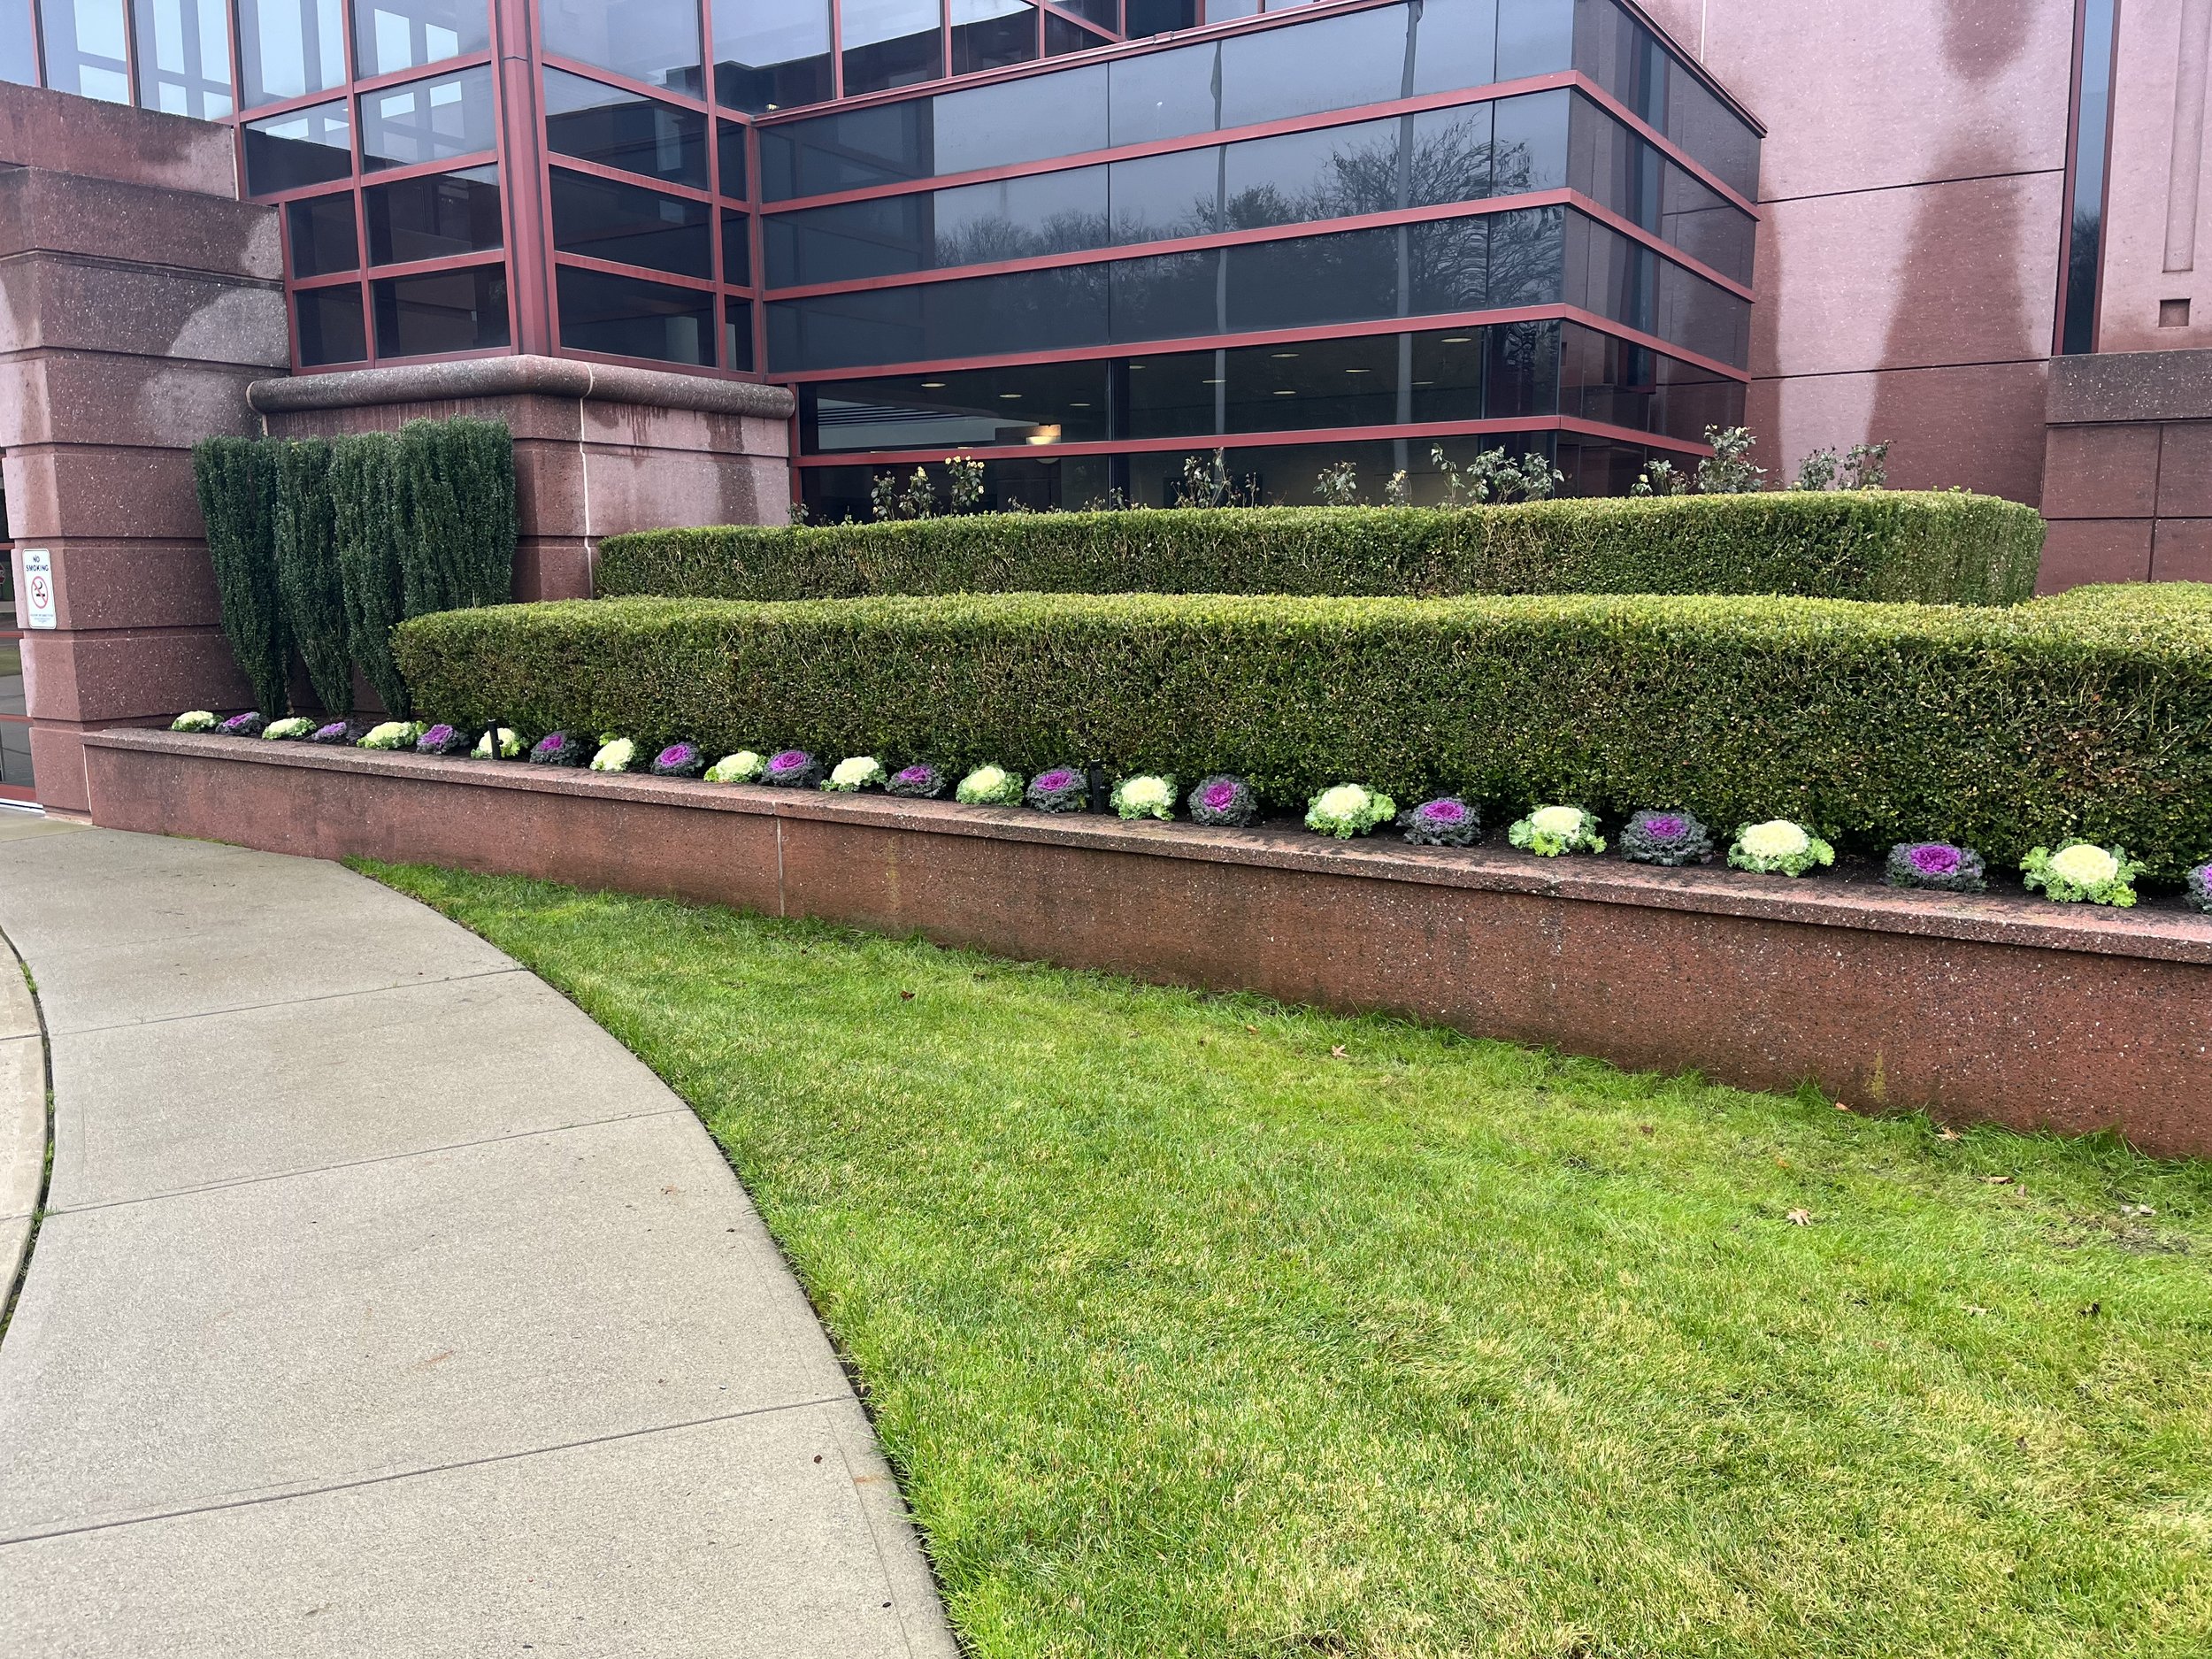 Commercial Landscape Maintenance Contracts in New Jersey